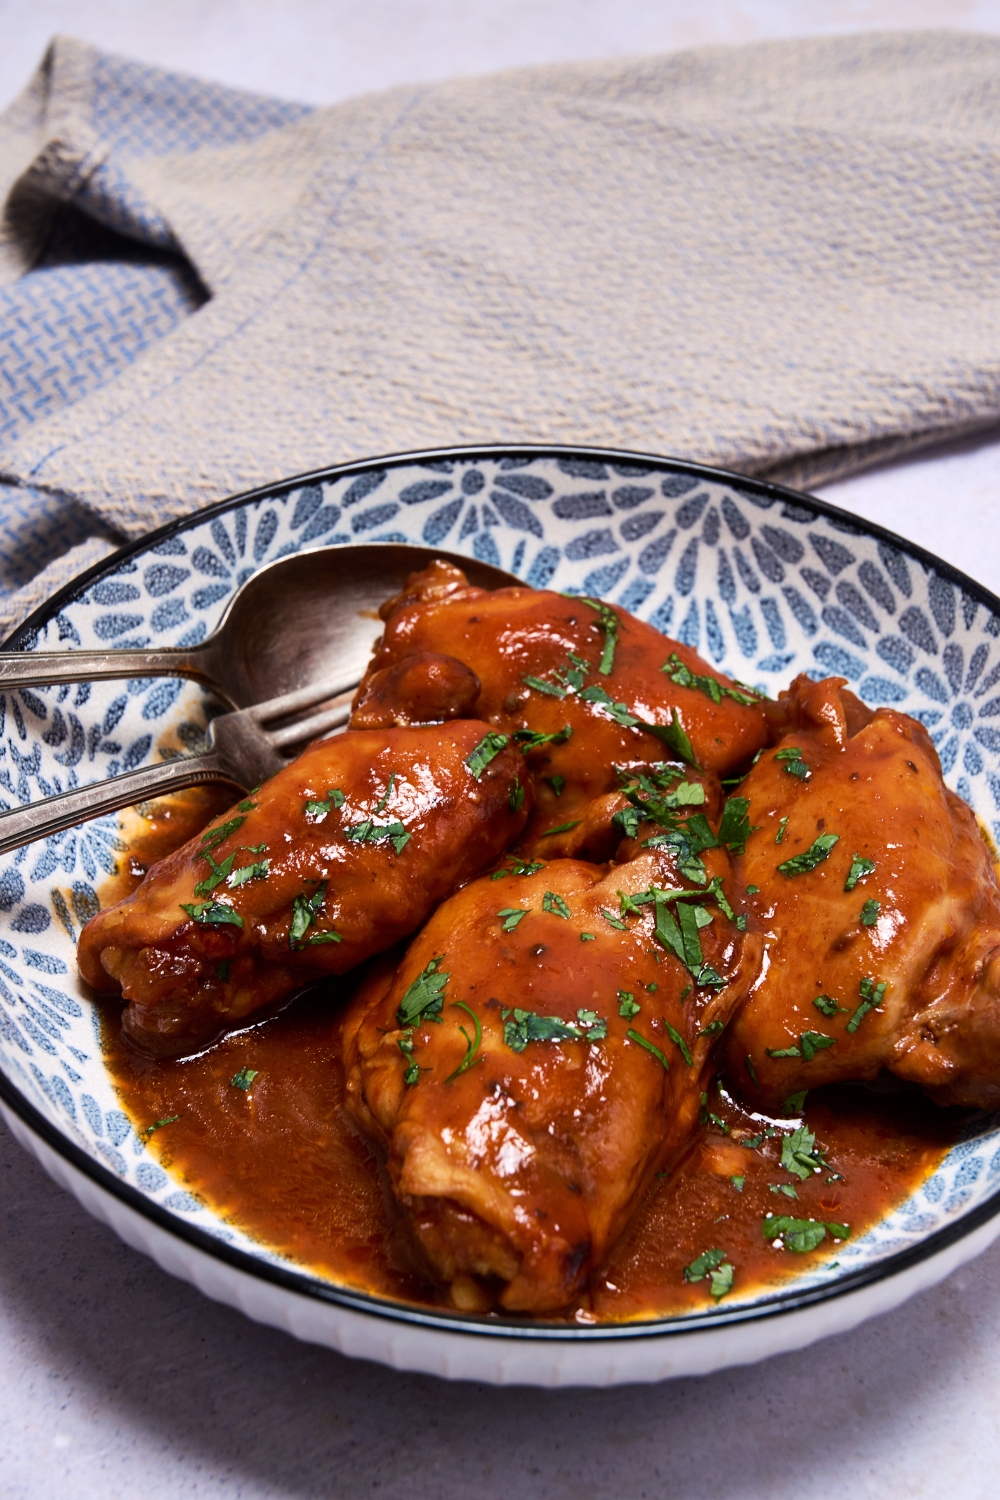 Cooked chicken thighs are in a blue and white dish. They're covered in barbecue sauce. A fork and spoon are in the dish.